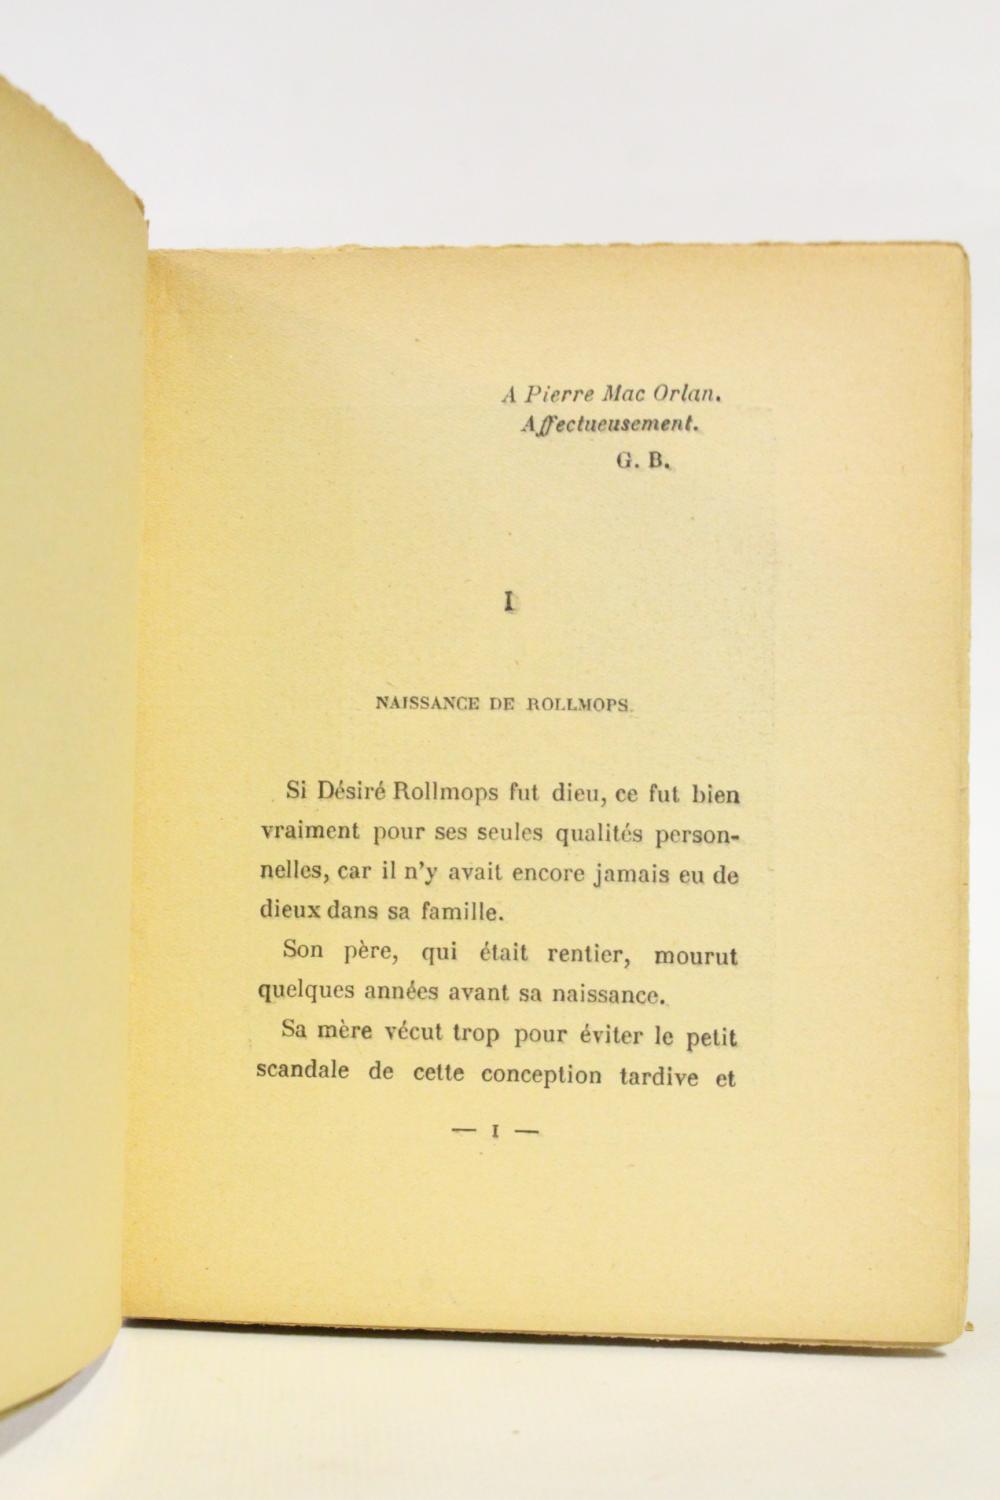 Roll-mops by GUS BOFA Gustave Henri Émile Blanchot, dit: couverture ...